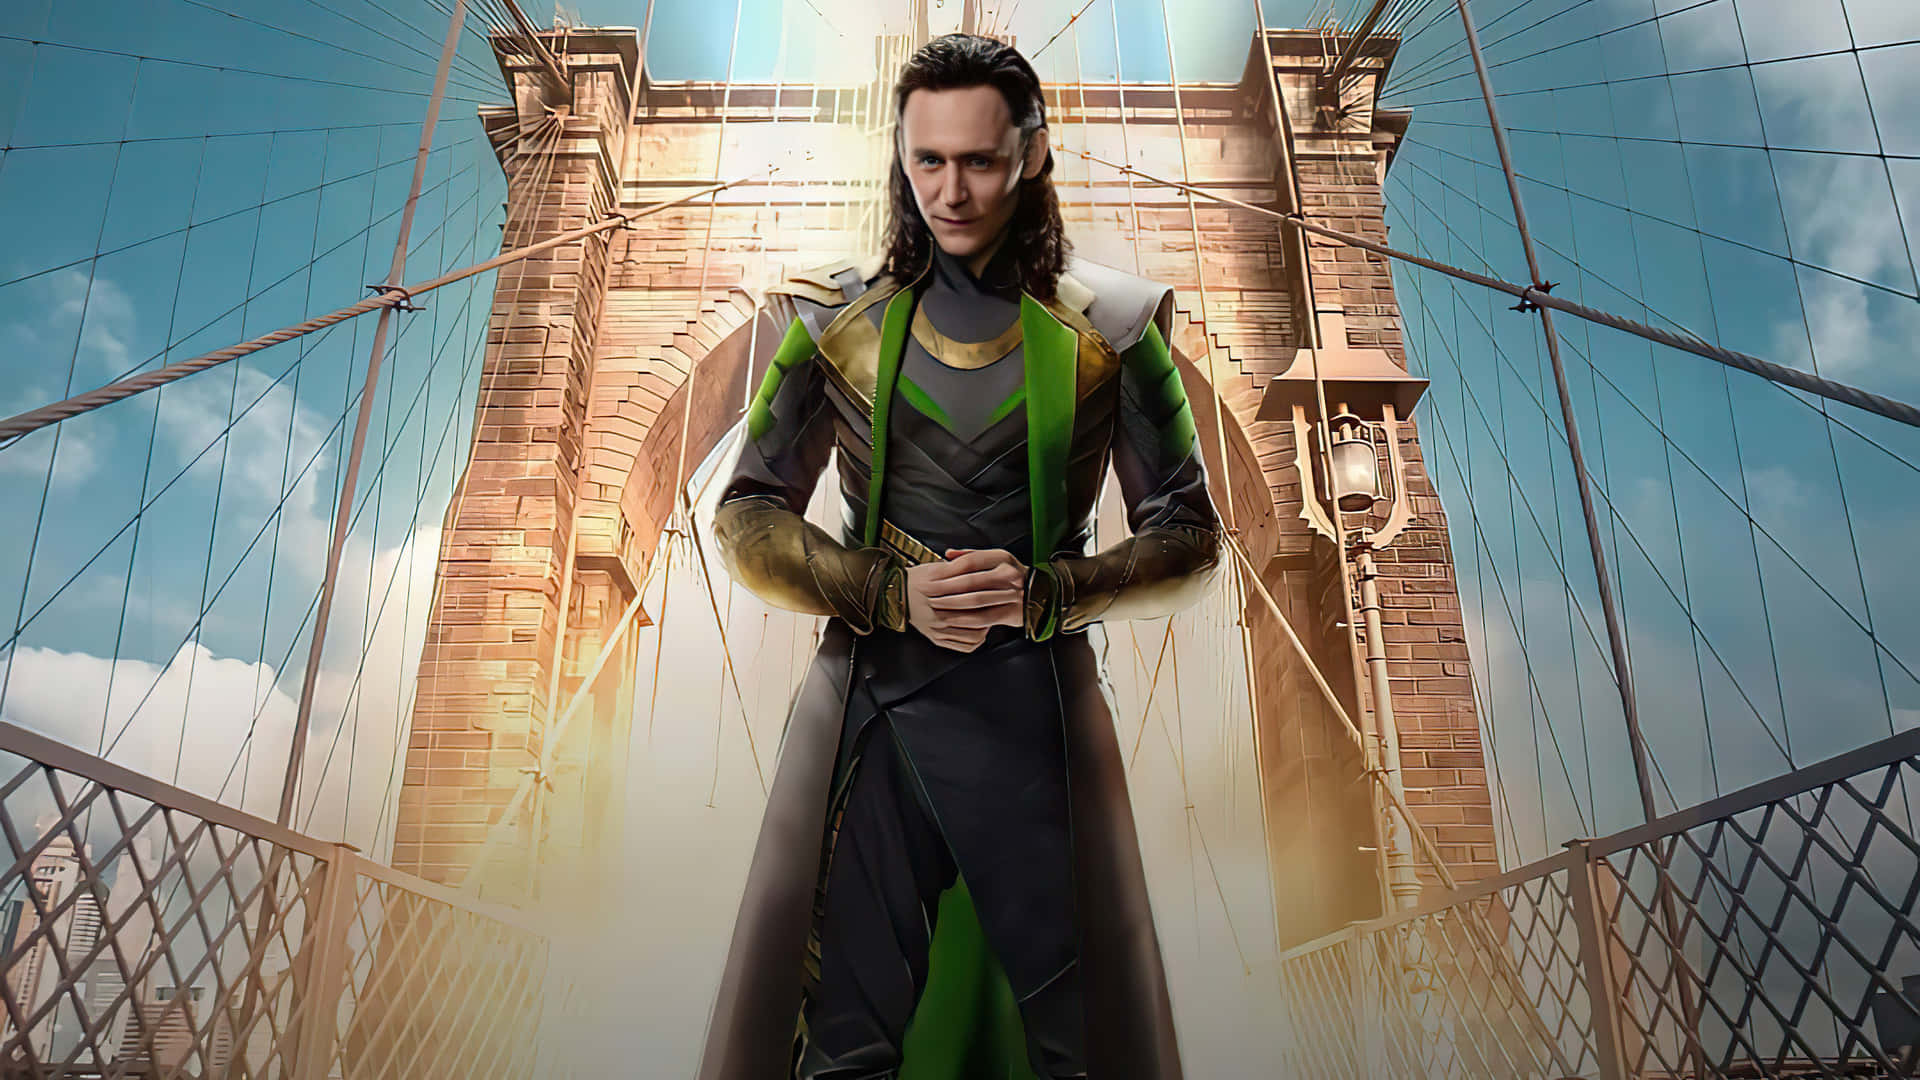 Marvel's Loki Serves as the Main Antagonist in the Marvel Cinematic Universe Wallpaper